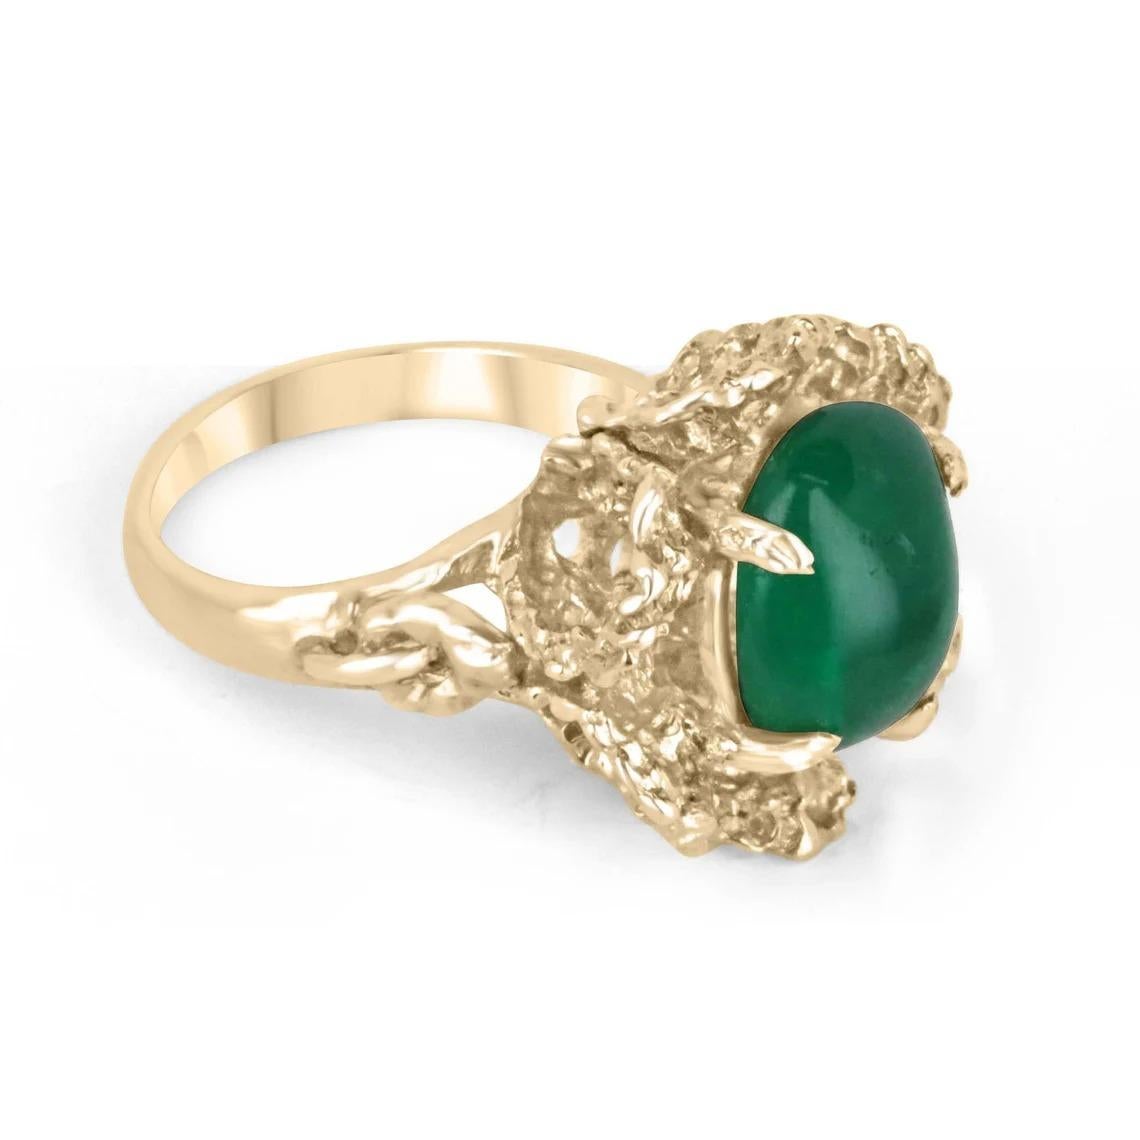 Presenting a breathtaking solitaire women's ring adorned with a magnificent 4.65-carat sugarloaf cabochon emerald at its core. The emerald, boasting a dark green hue and displaying very good luster, takes center stage, captivating all who behold it.